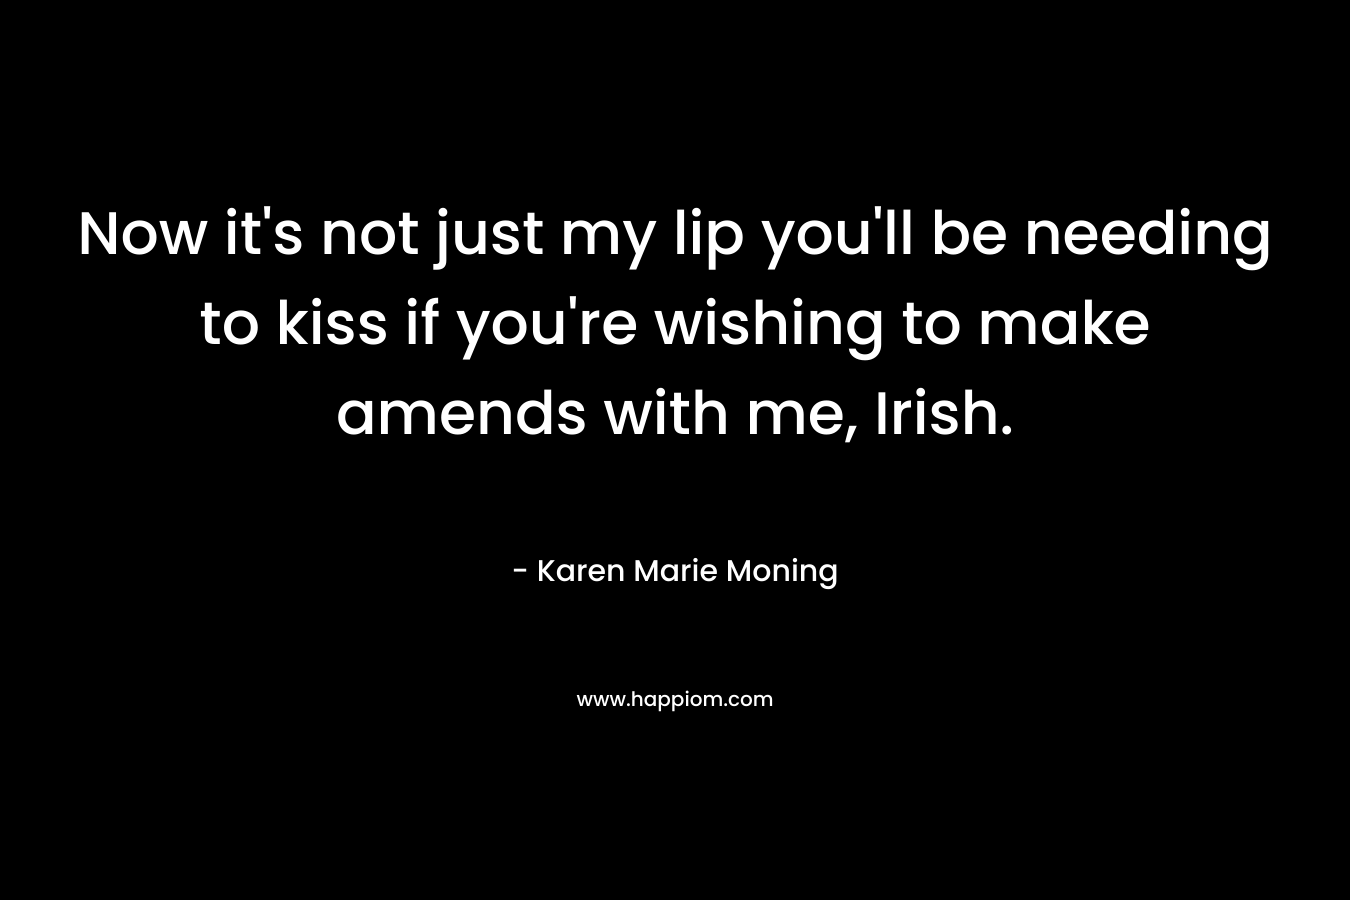 Now it's not just my lip you'll be needing to kiss if you're wishing to make amends with me, Irish.